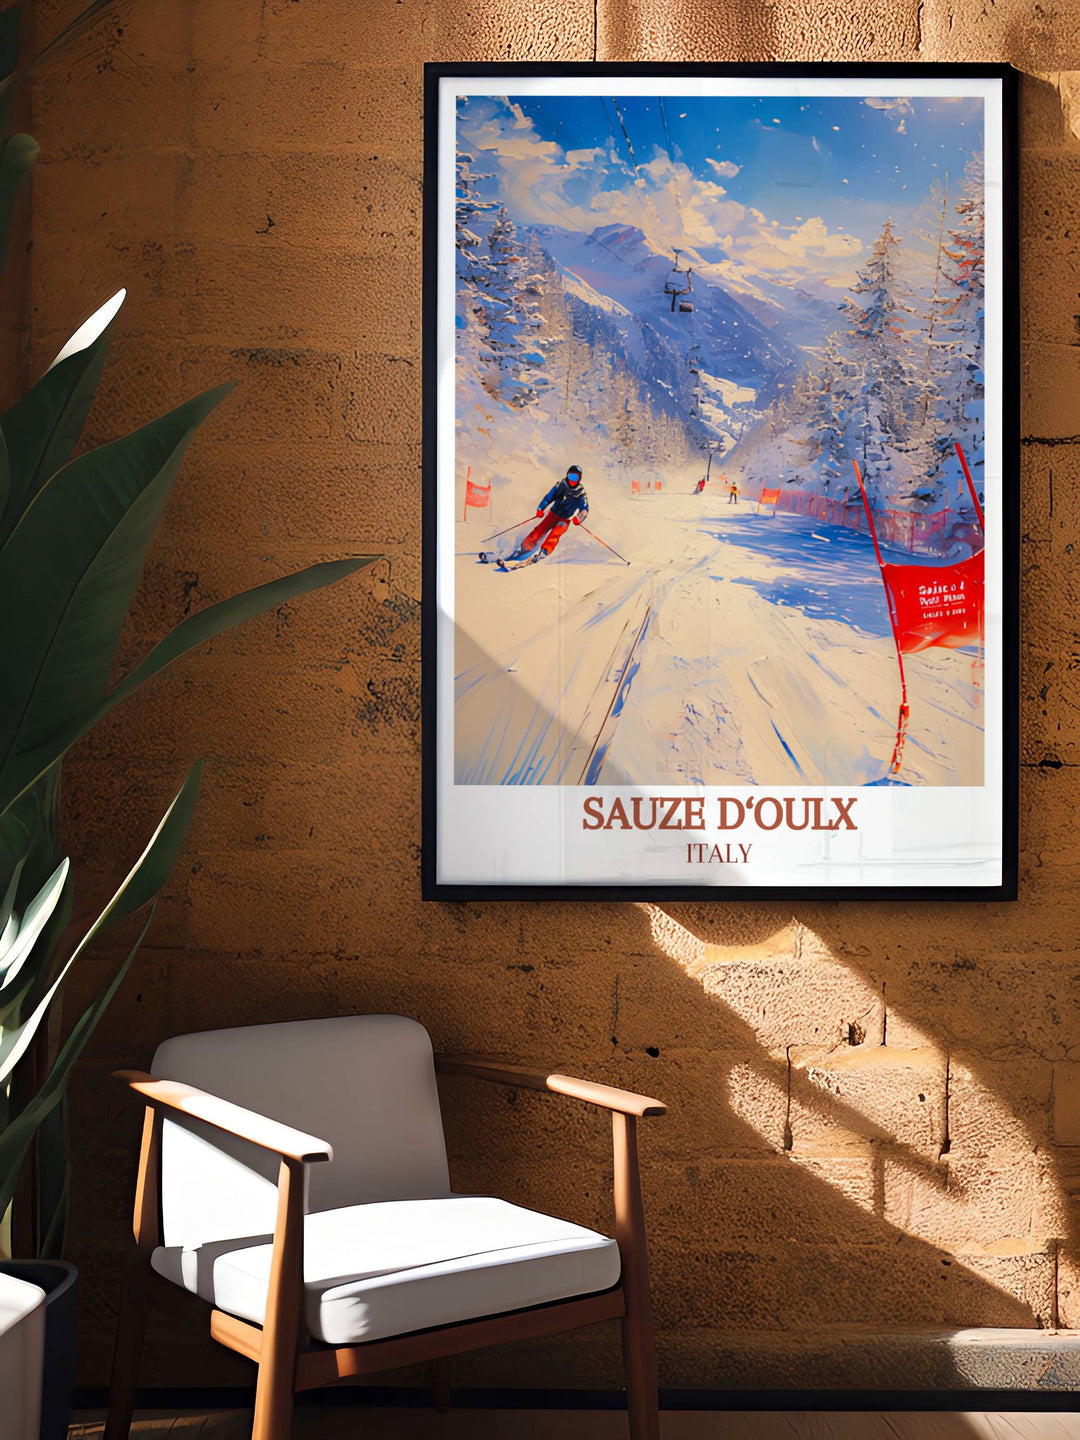 Sauze dOulx Ski Resort Fine Art Prints designed to evoke a sense of adventure and appreciation for the great outdoors, perfect for any decor.